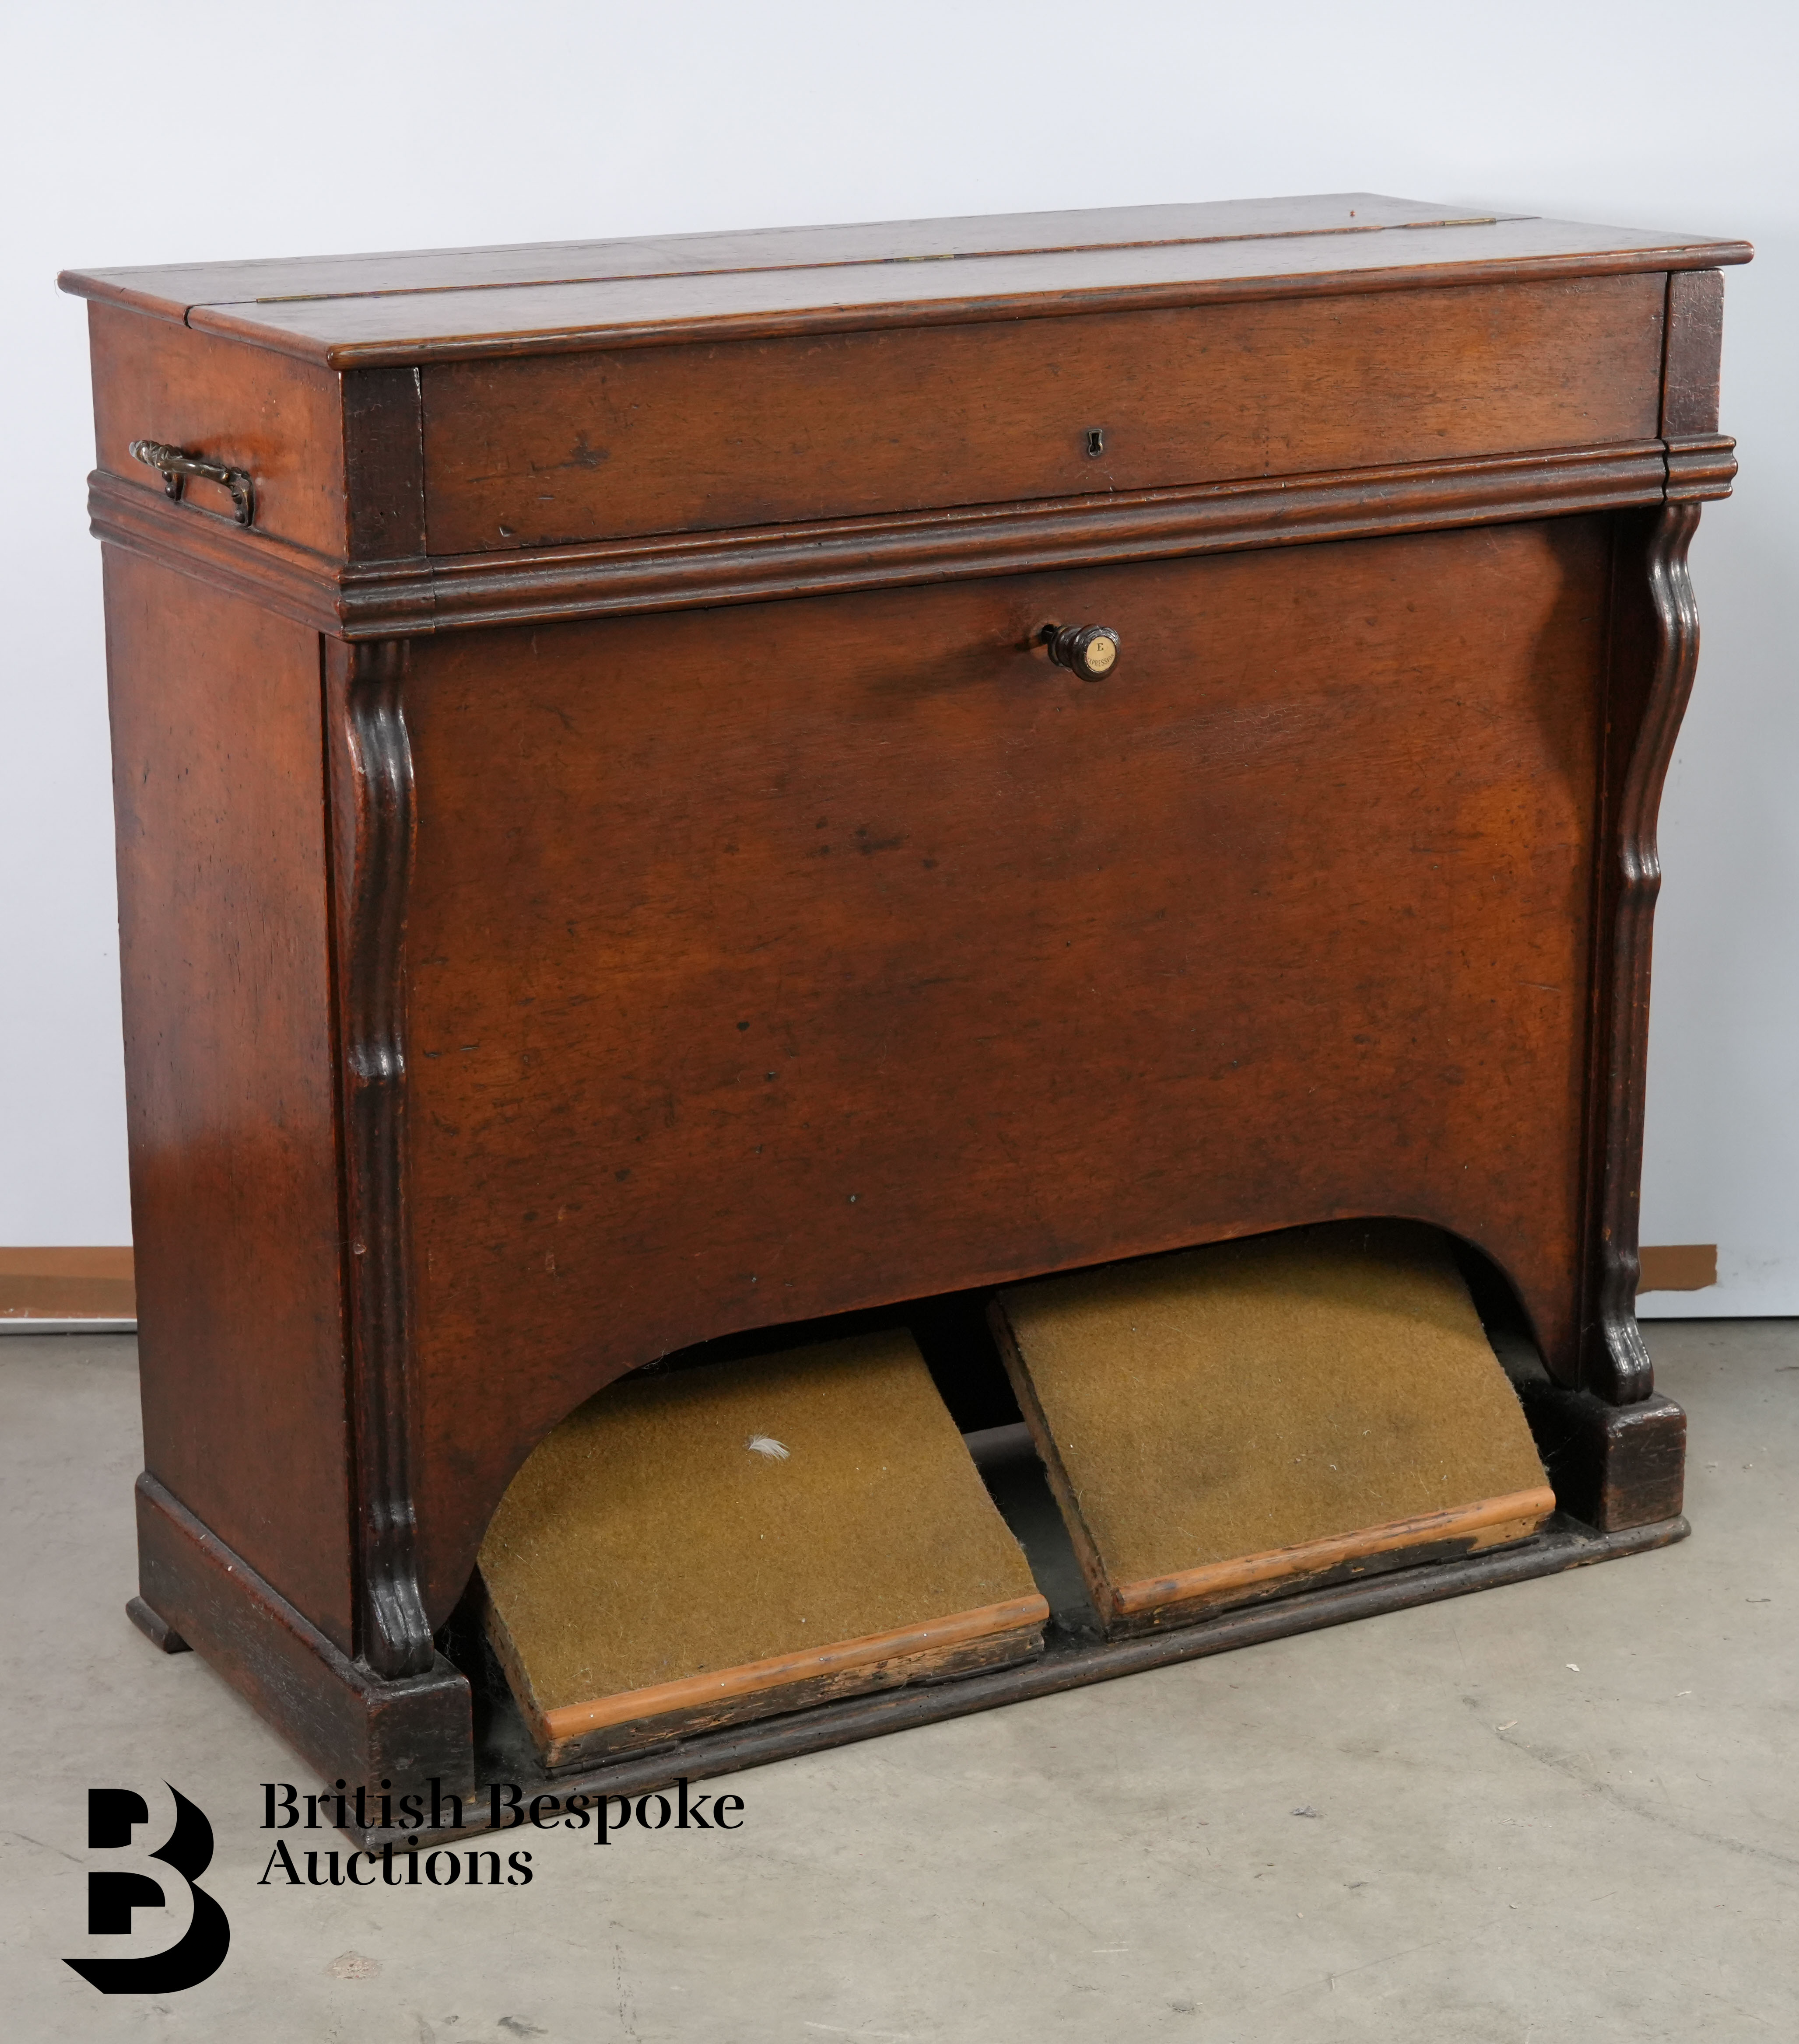 Early 20th Century Field Organ - Image 2 of 5